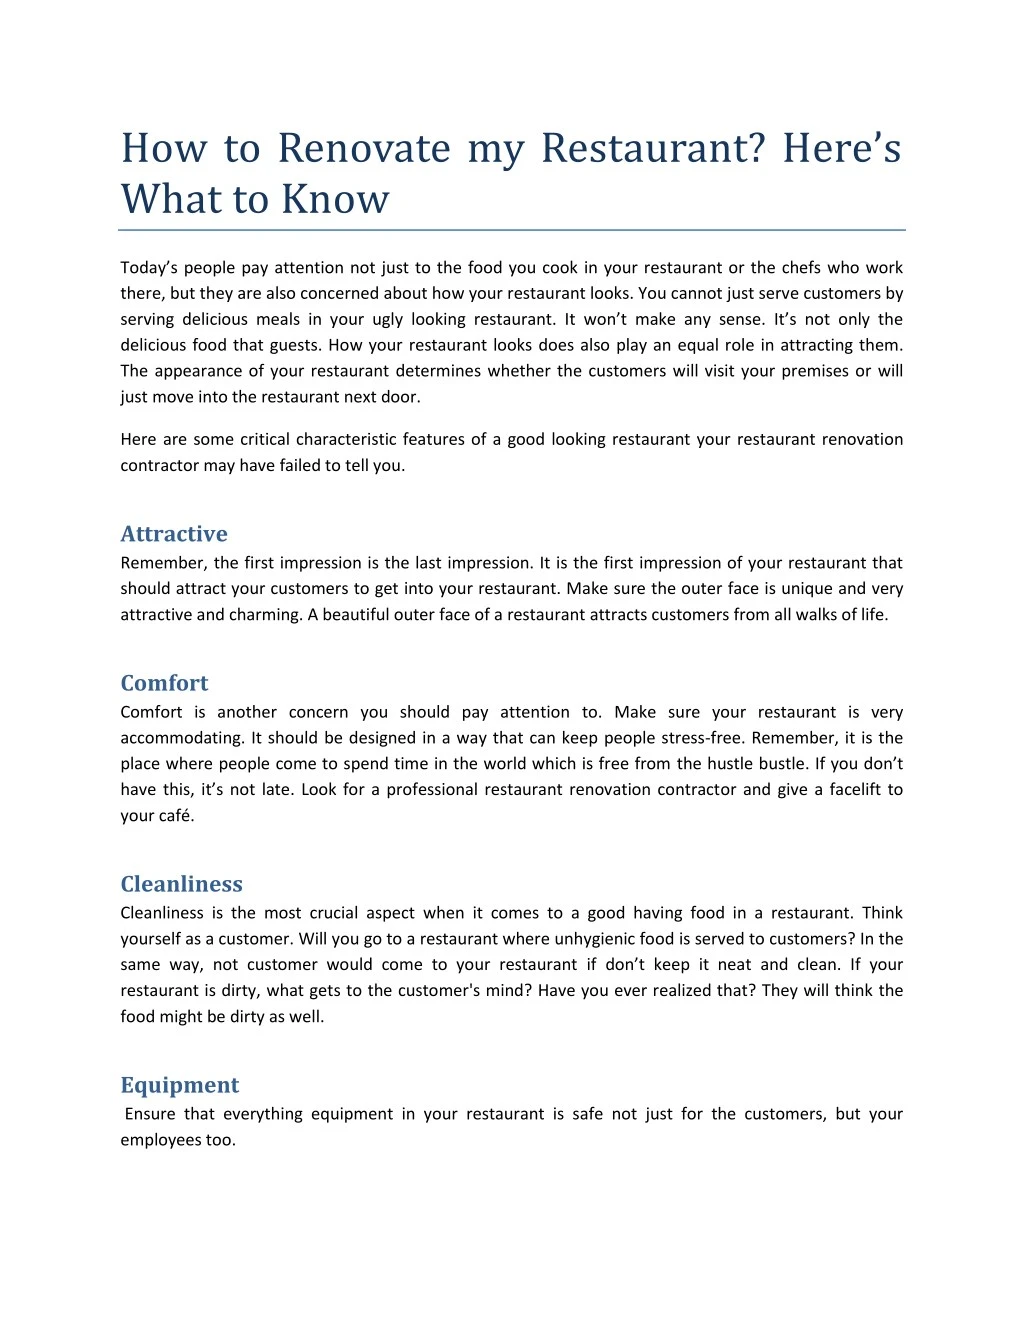 how to renovate my restaurant here s what to know